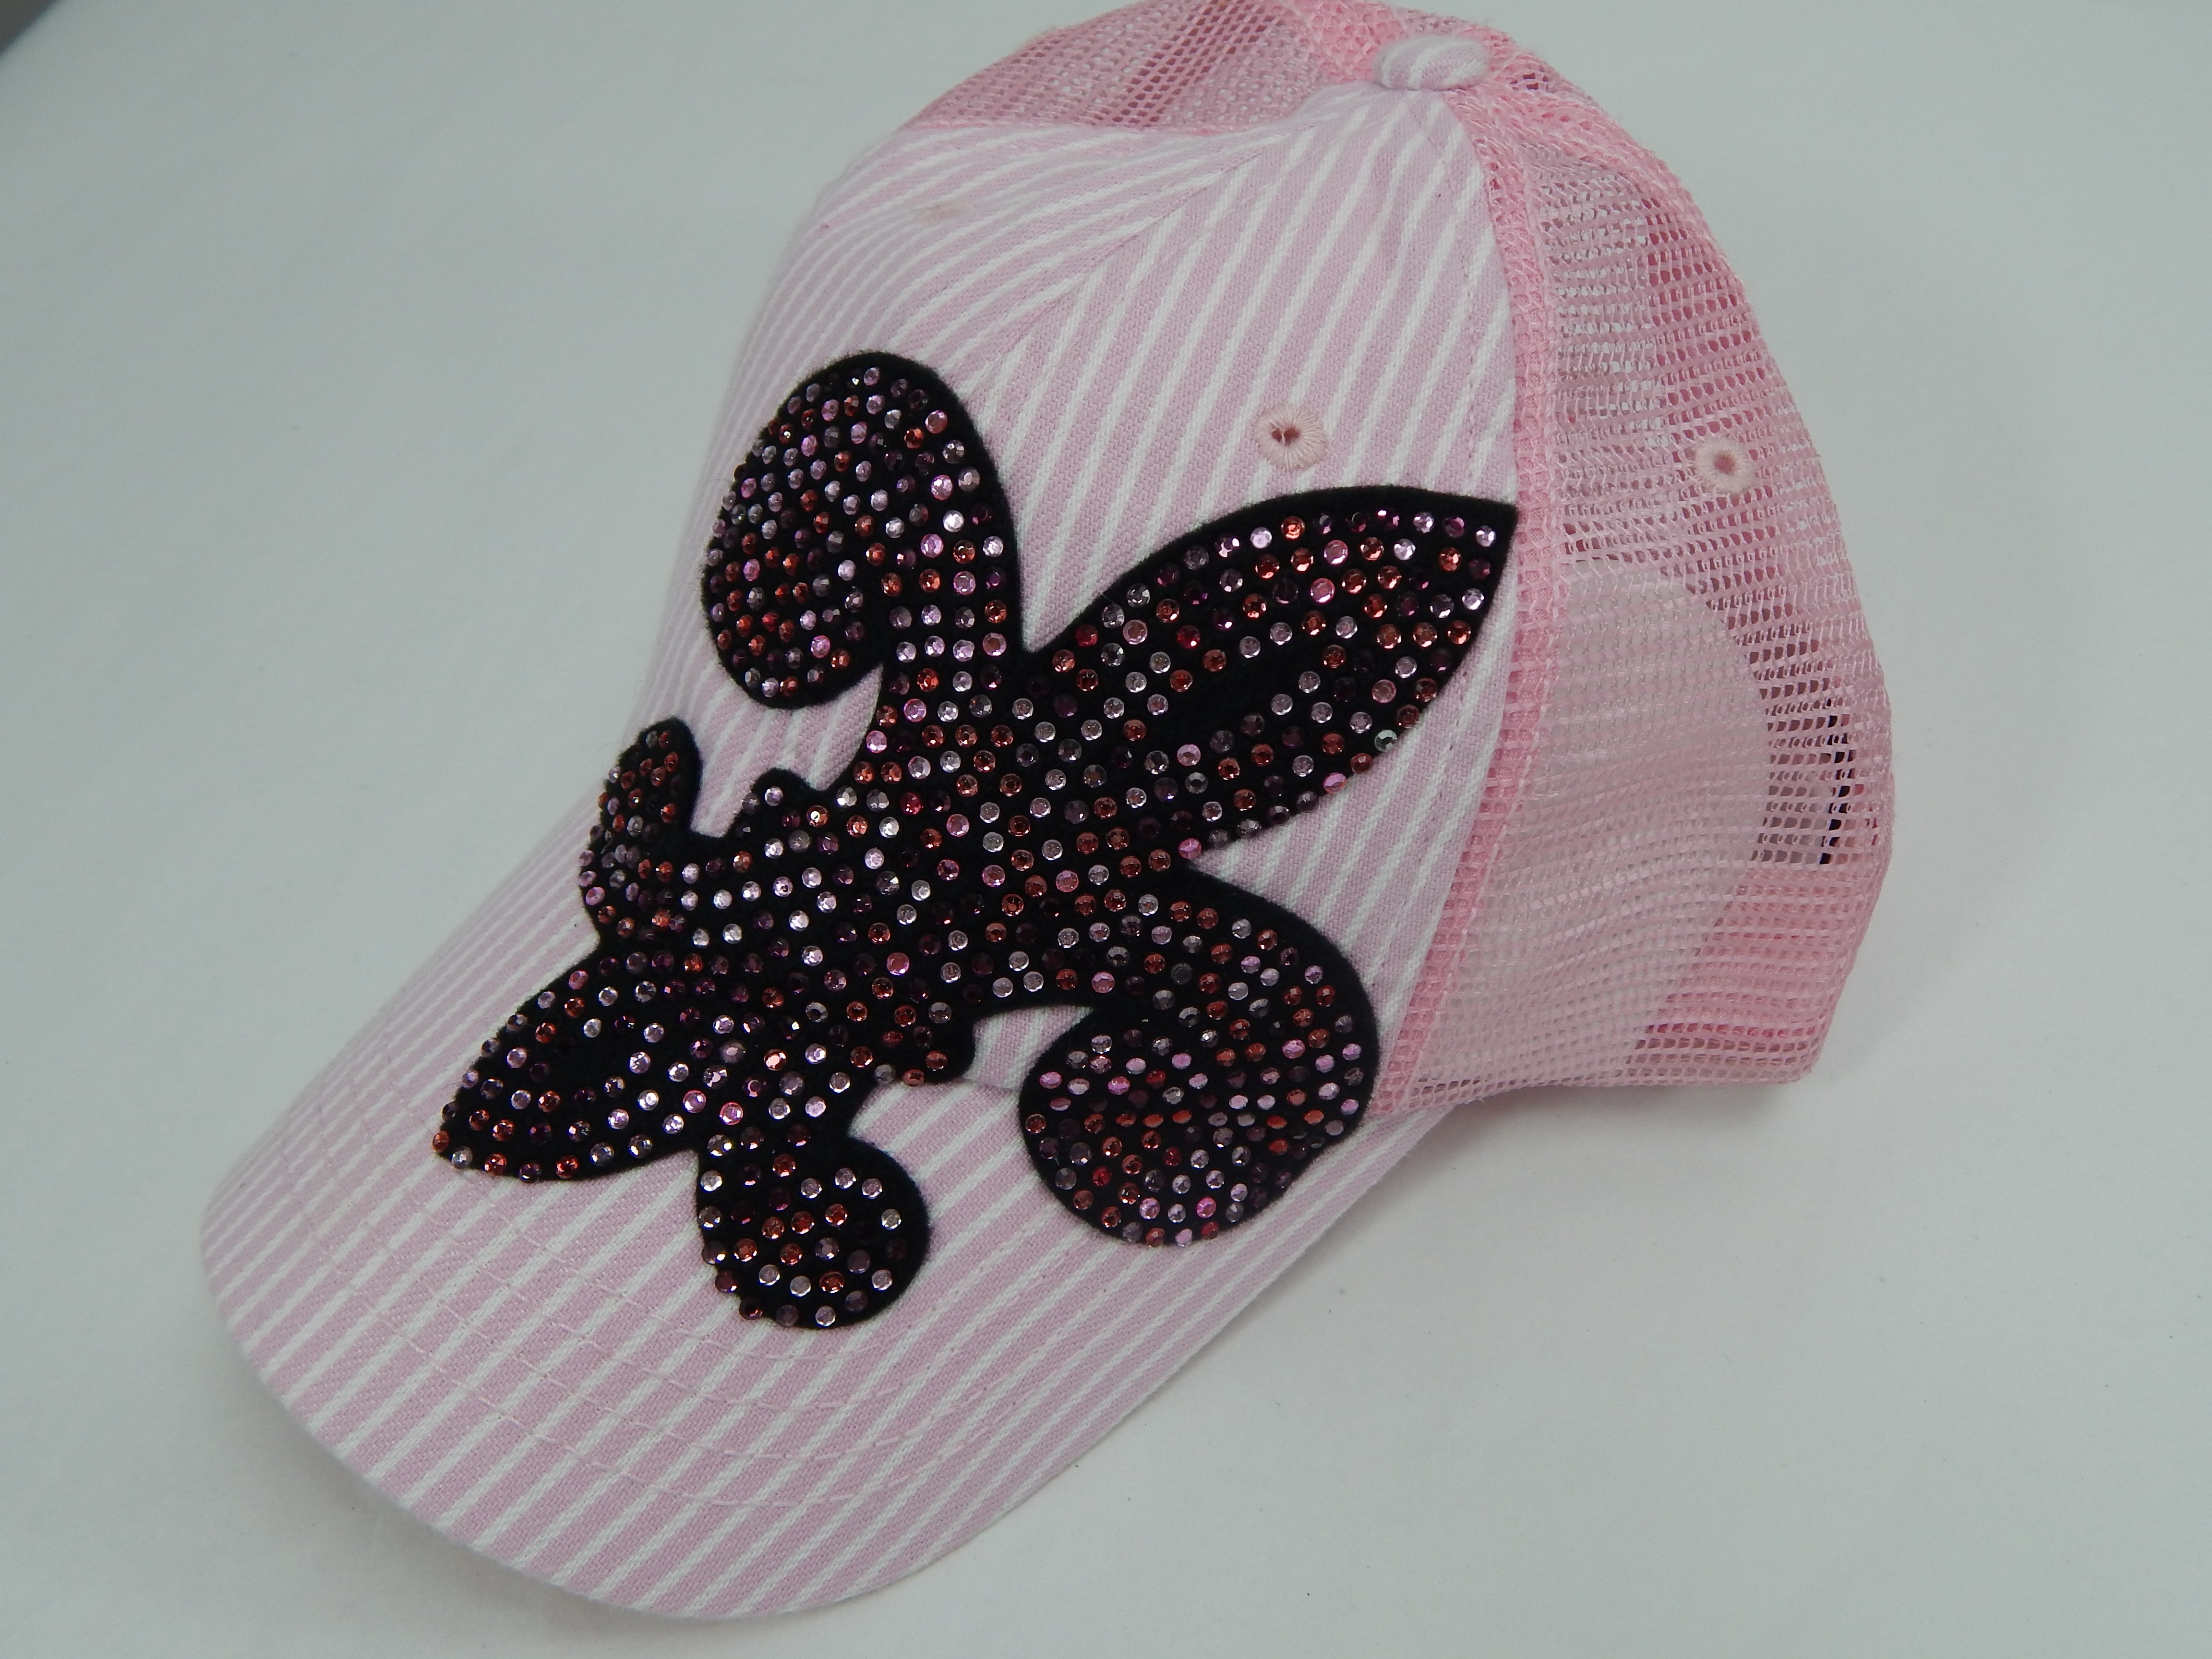 Olive and Pique Hat - Pink Pin Stripe with Rhinestone Fleur de Lis